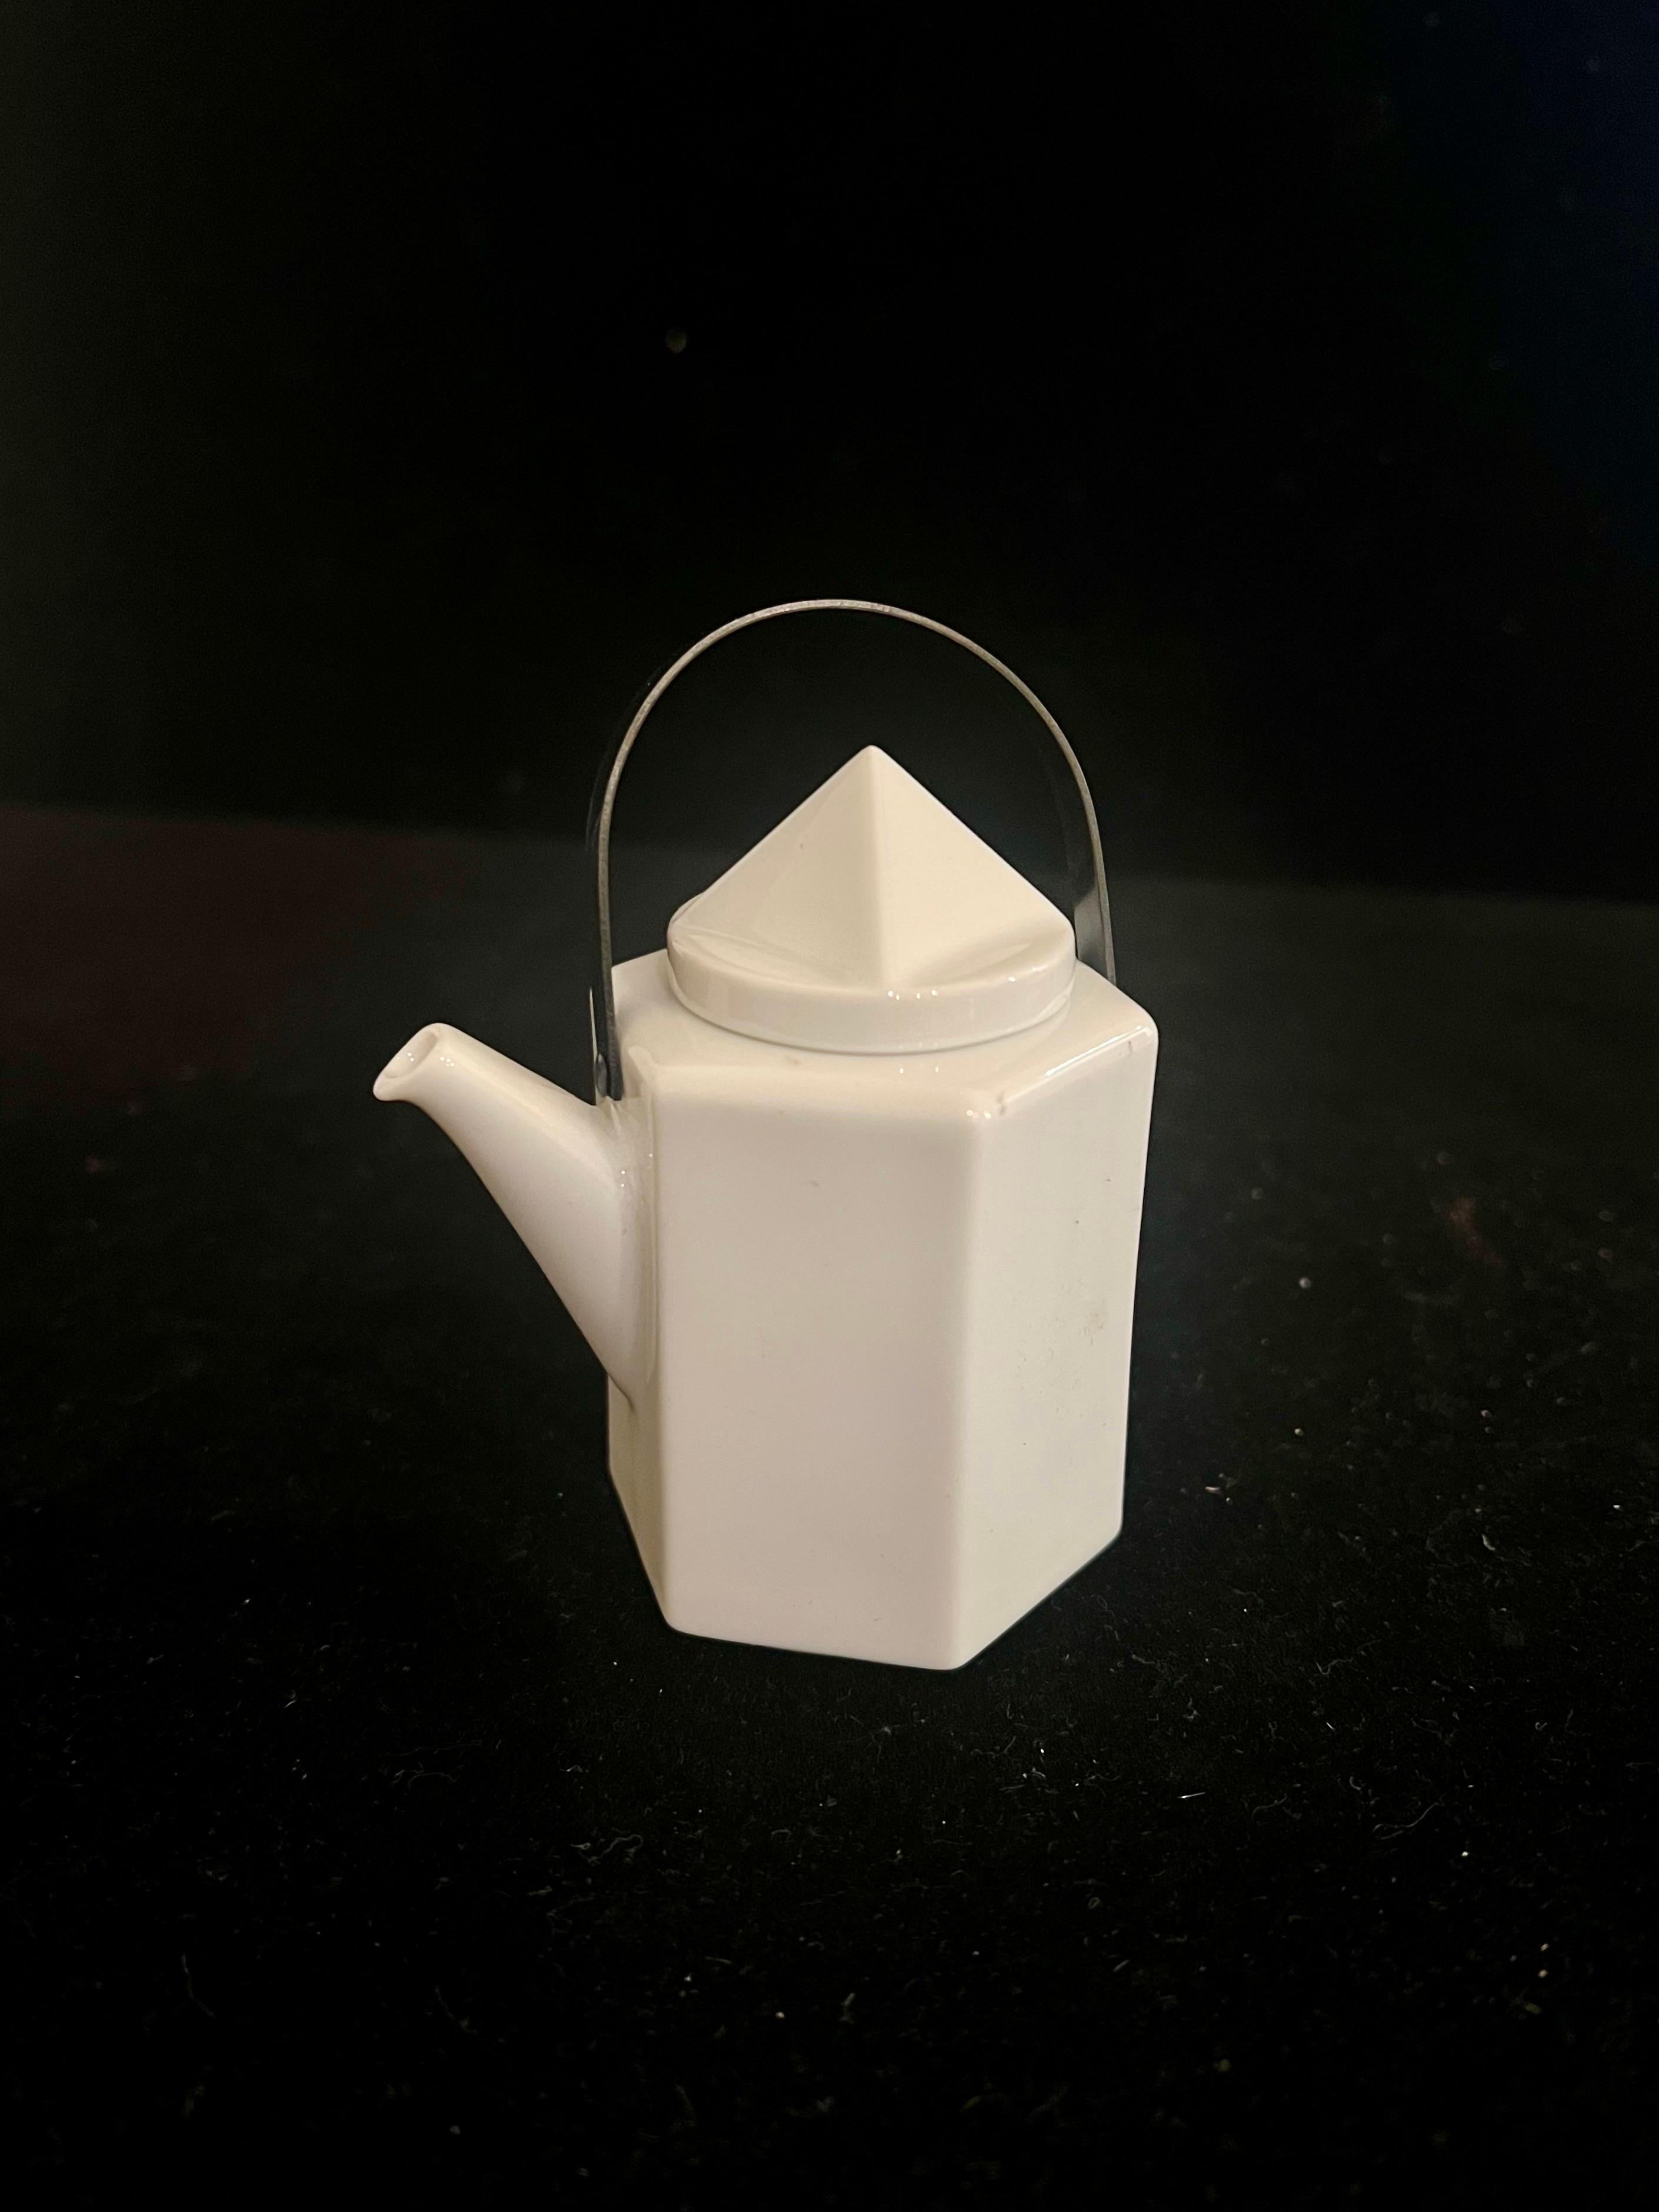 A stylish petite teapot designed by Barbara Brenner and manufactured by Rosenthal in Germany, it's in lovely condition. An iconic piece of Rosenthal Studio Linie. Part of the Mini series. with its original box.